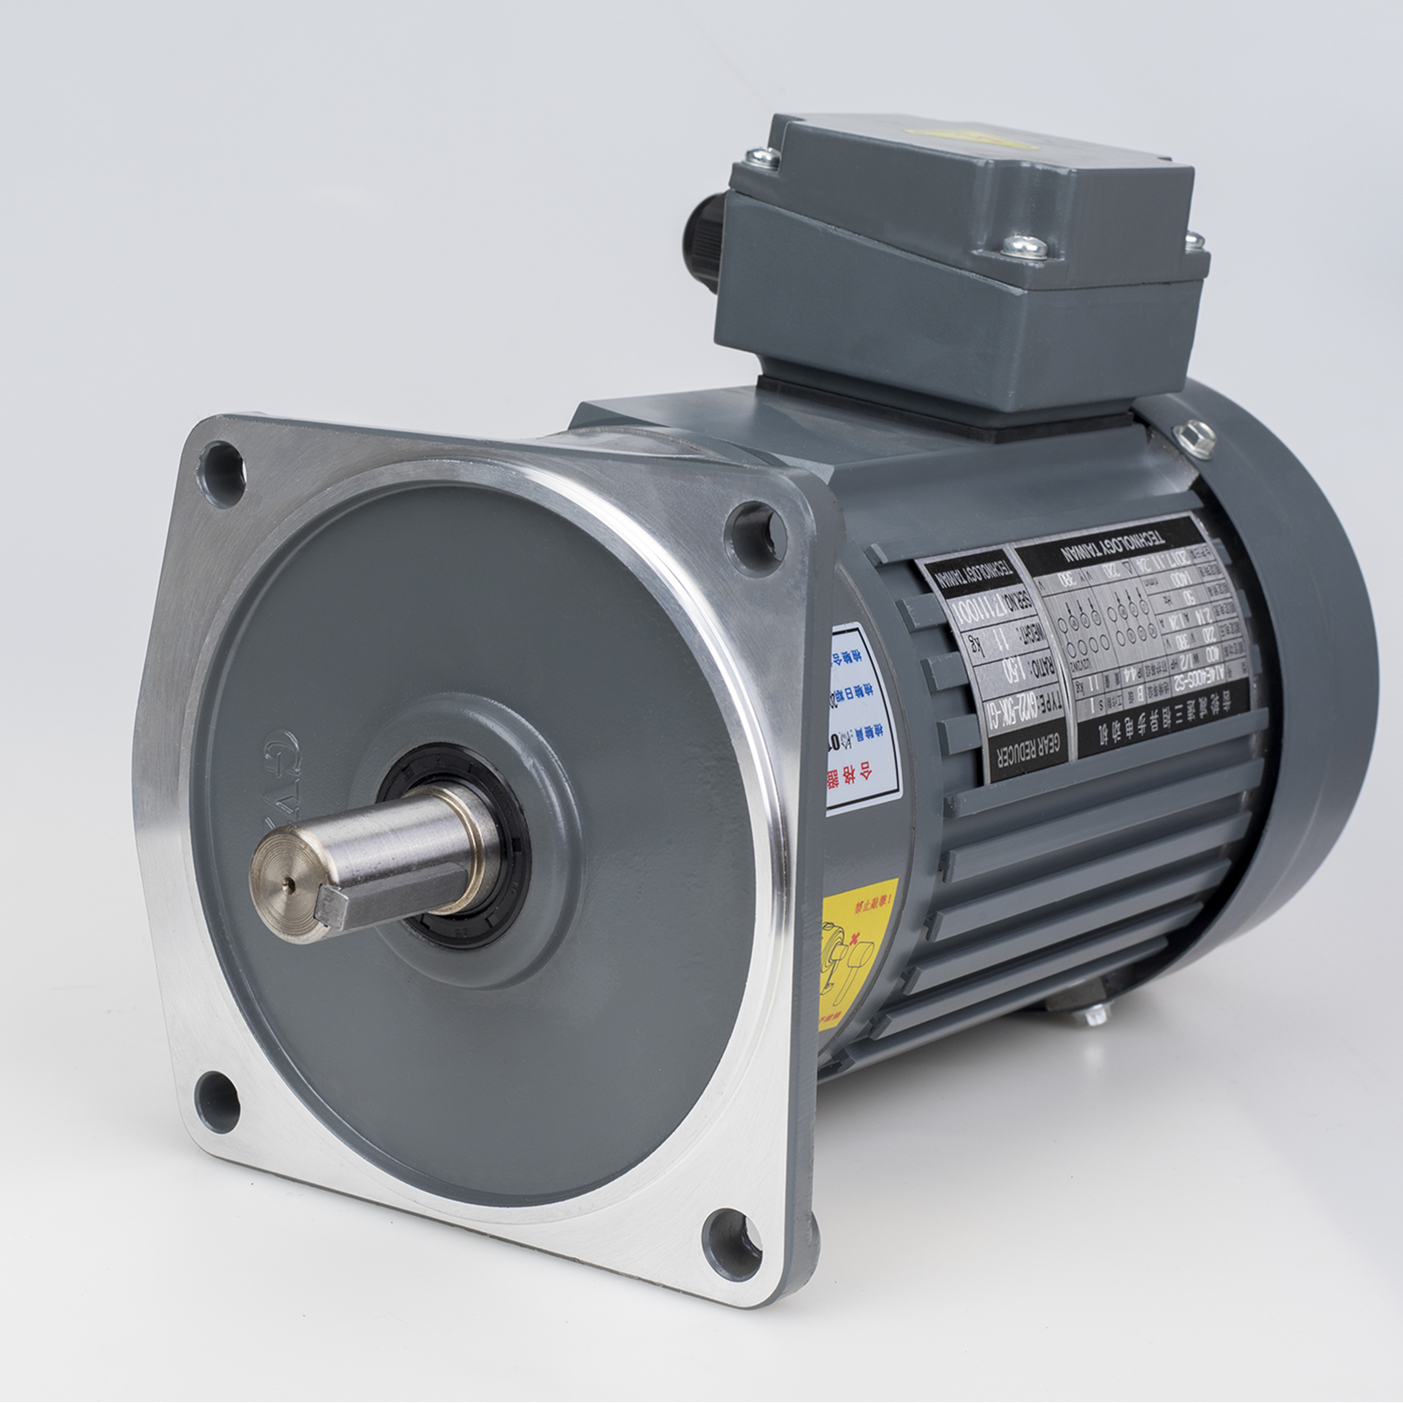 Gear motor with 7,5 Hp, 1500Rpm Ratio 1:50 with a helical gear